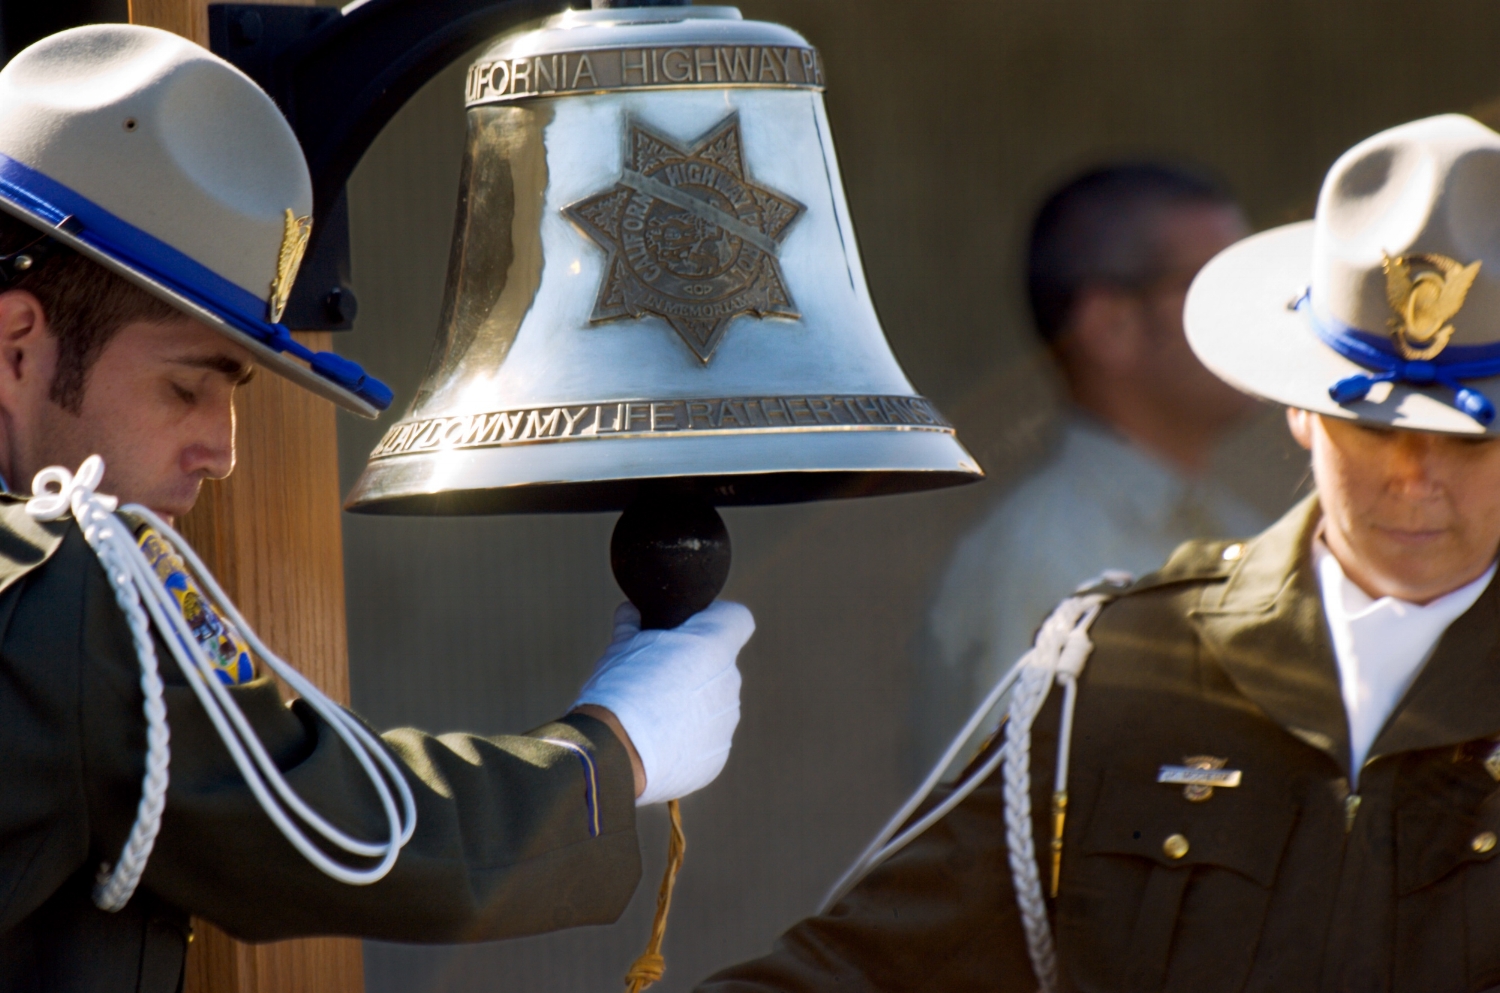  CHP Officers prepare to ring a bell during a ceremonial bell ringing at the CHP Academy in West Sacramento on Wednesday August 1, 2007. The ceremony was for Officer Douglas Russell who was killed in the line of duty in July. 